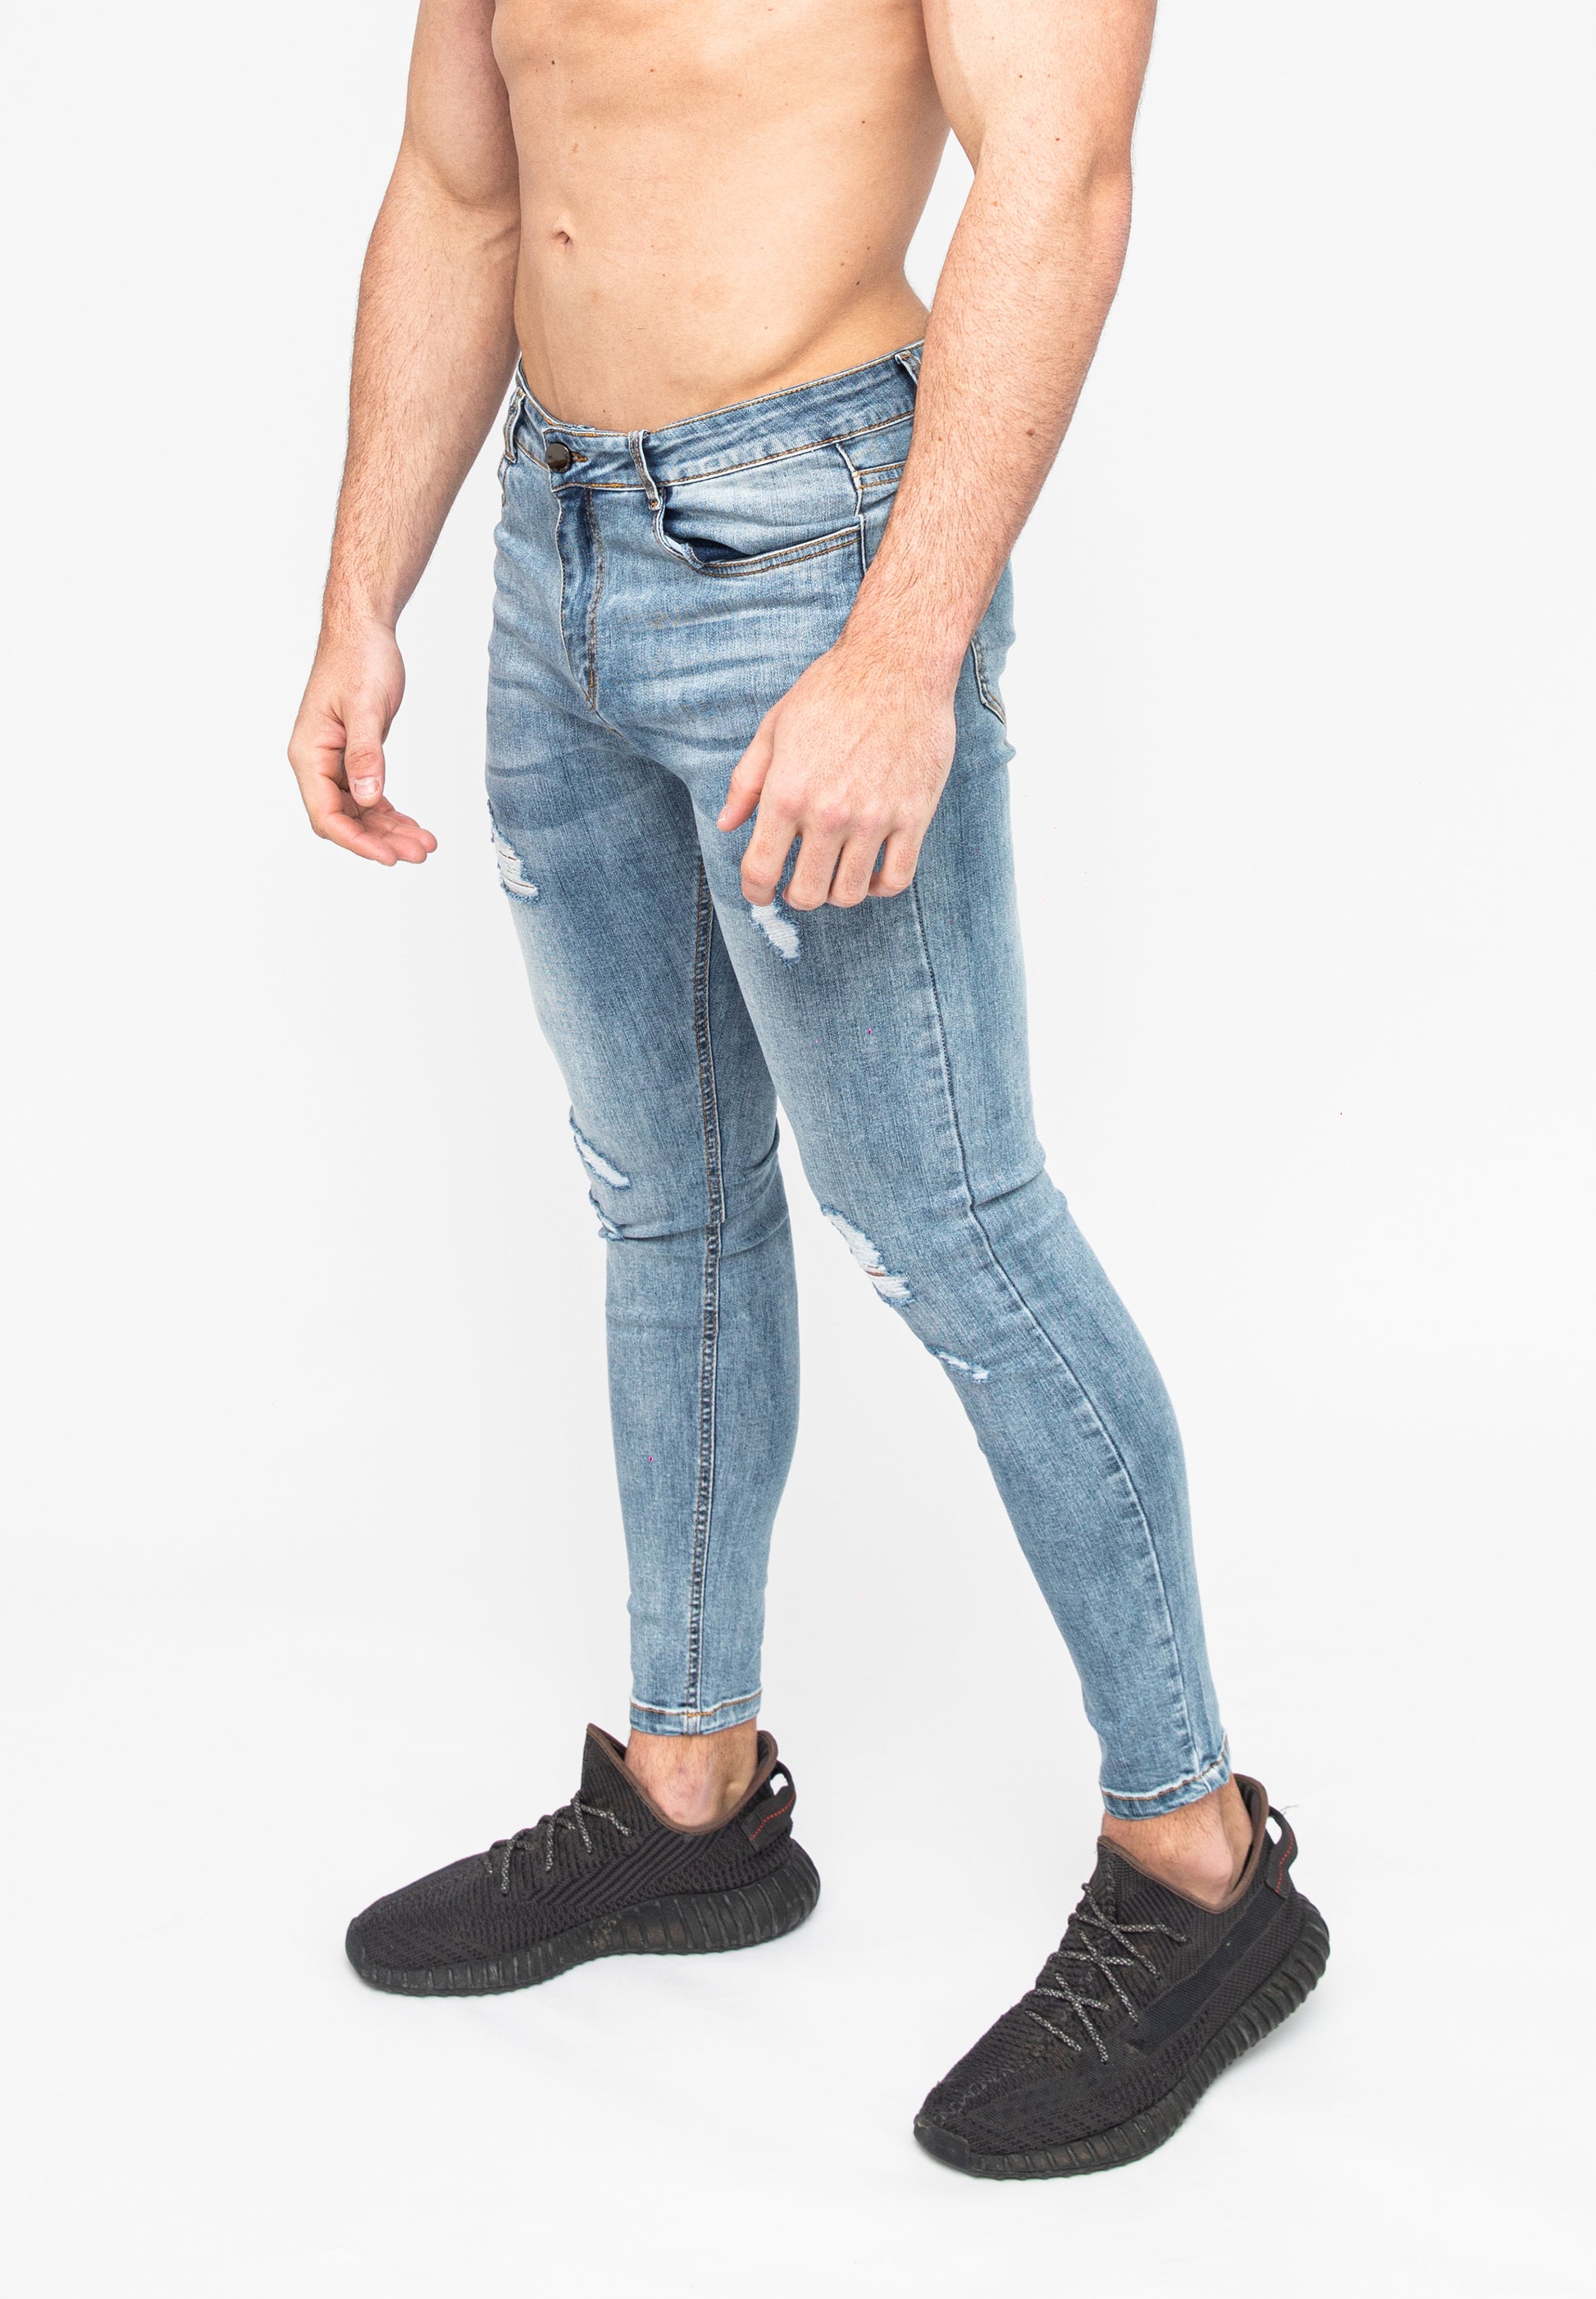 Blue Ripped Skinny Men's Jeans Angle